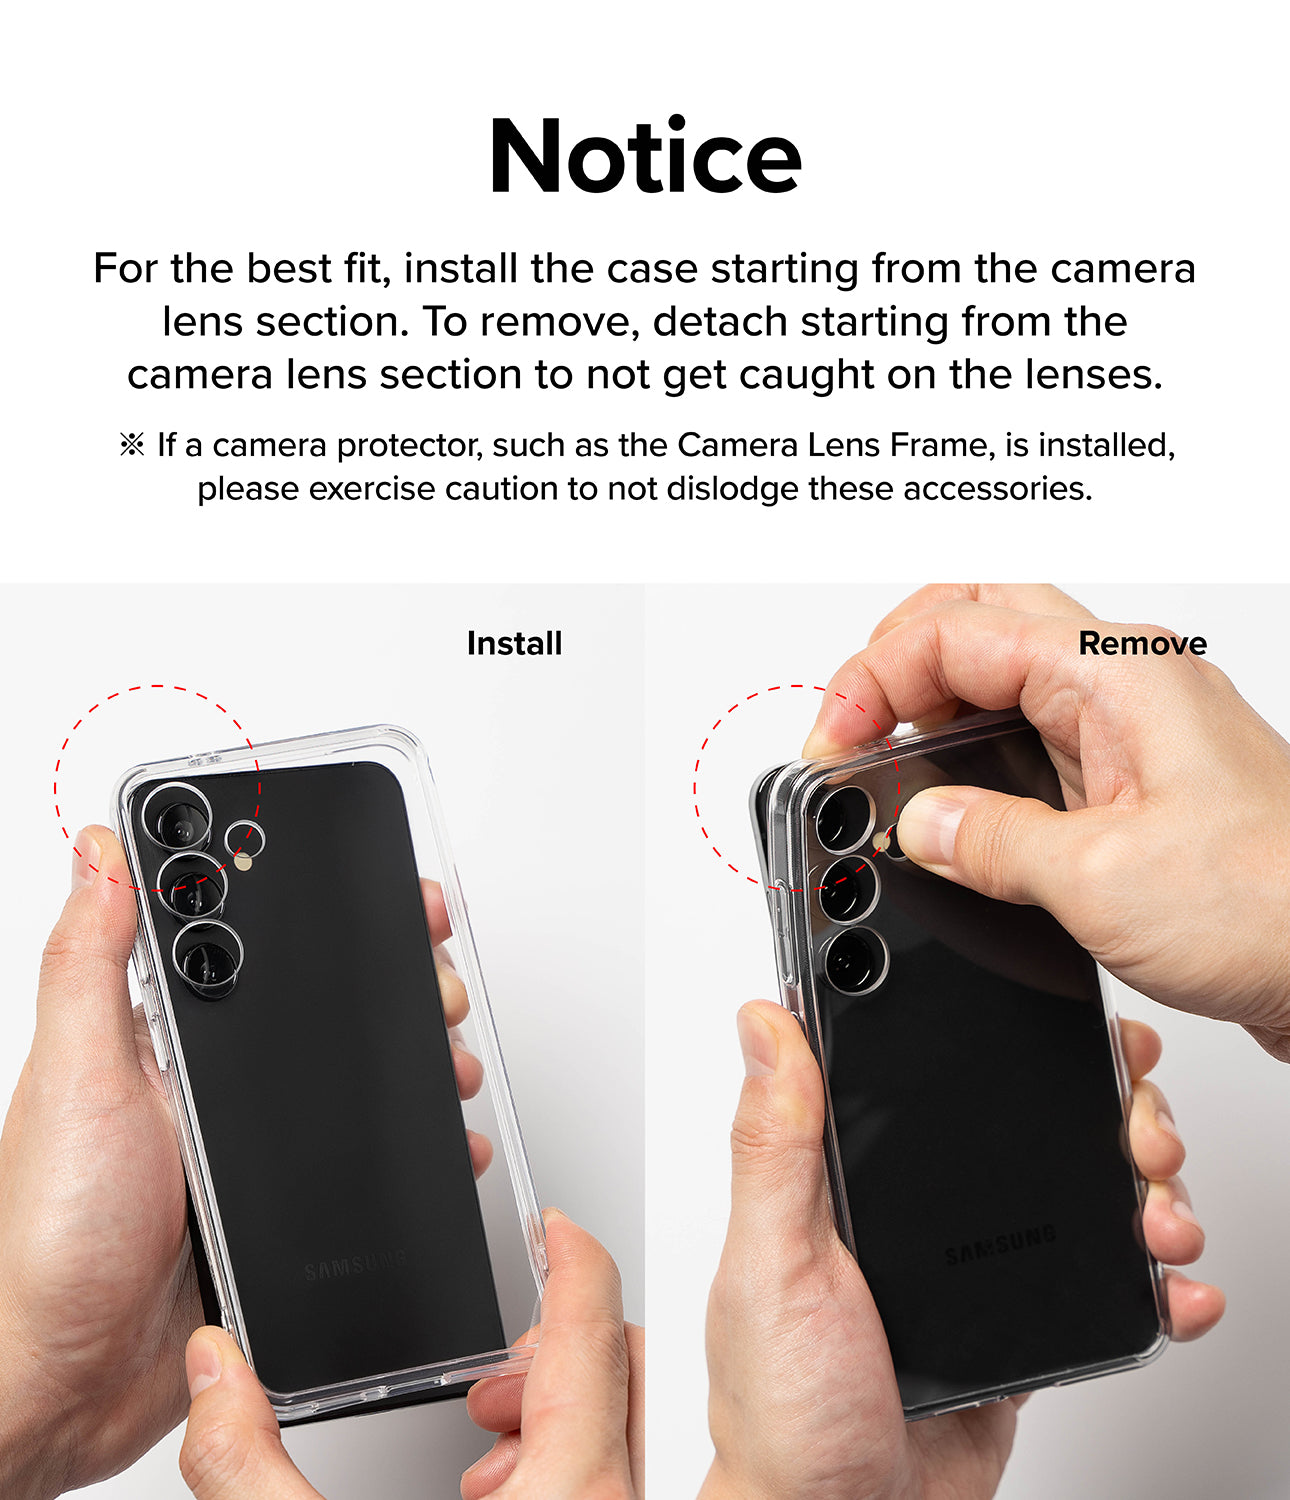 Galaxy S24 Case | Fusion-X - Black - Notice. For the best fit, install the case starting from the camera lens section. To remove, detach starting from the camera lens section to not get caught on the lenses.